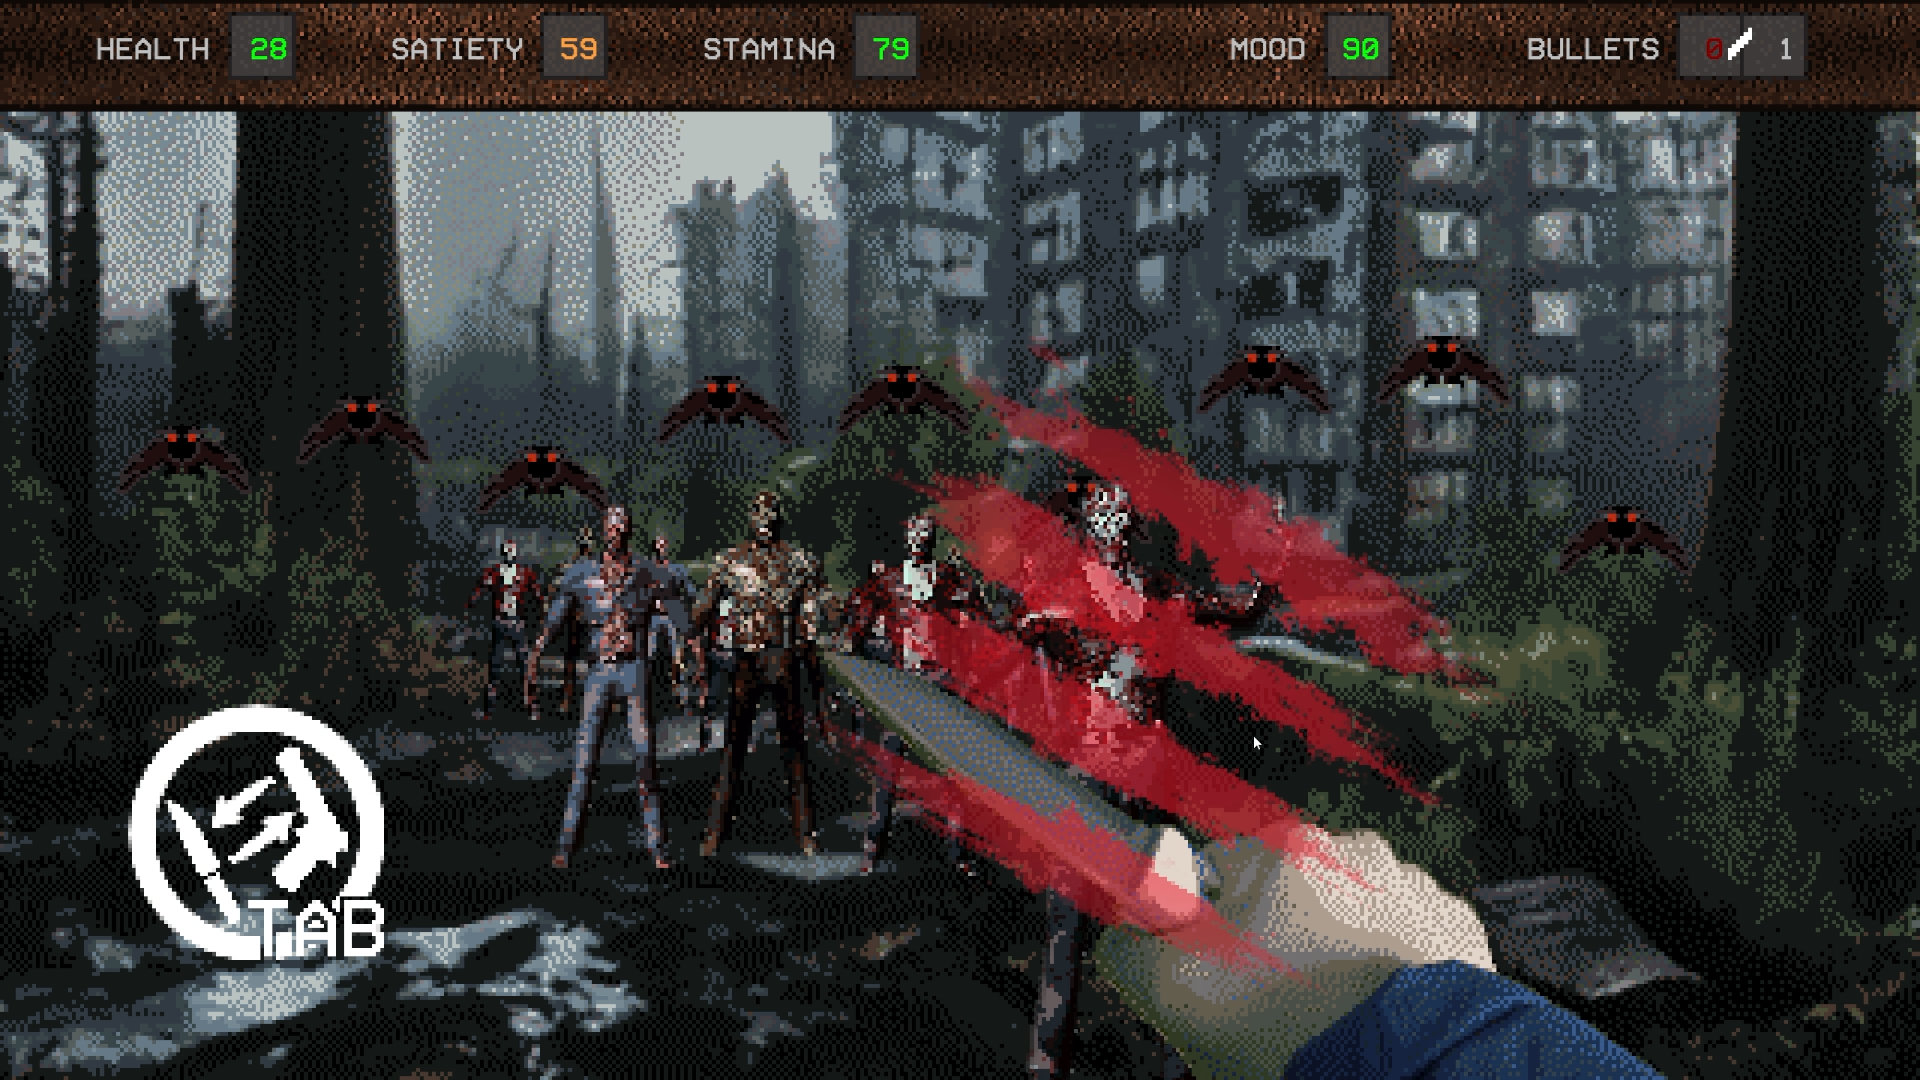 gameplay screenshot - combat against multiple zombies and bats